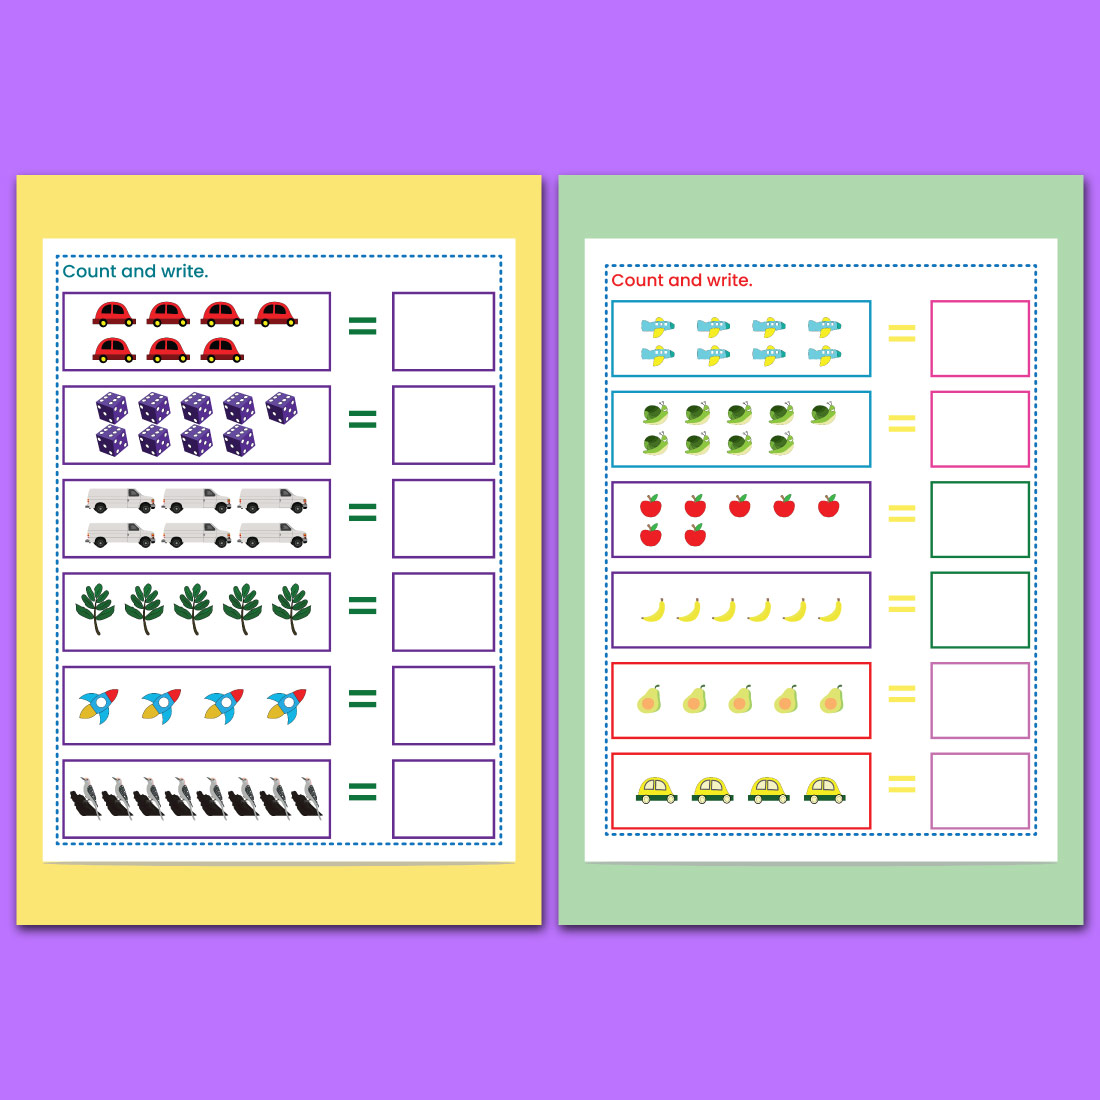 Kindergarten math Worksheets counting, matching and addition preview image.